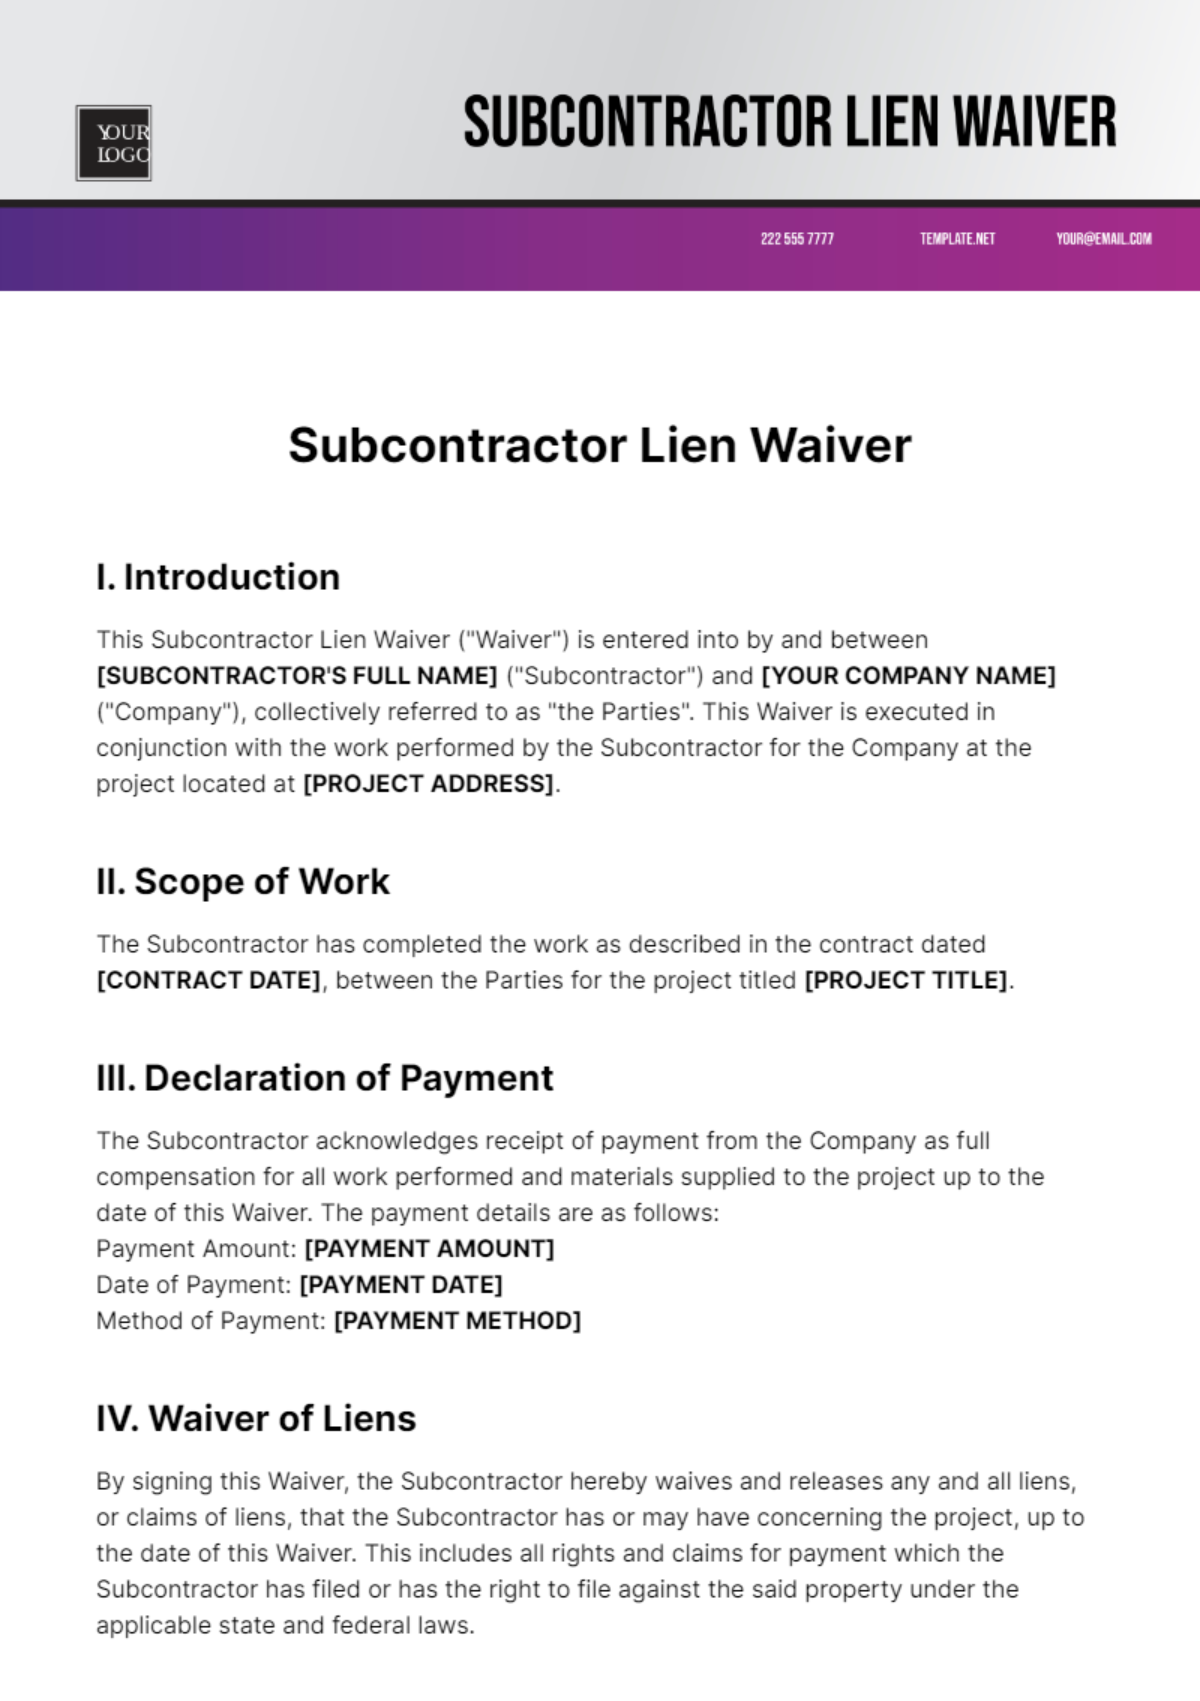 Free Subcontractor Lien Waiver Template